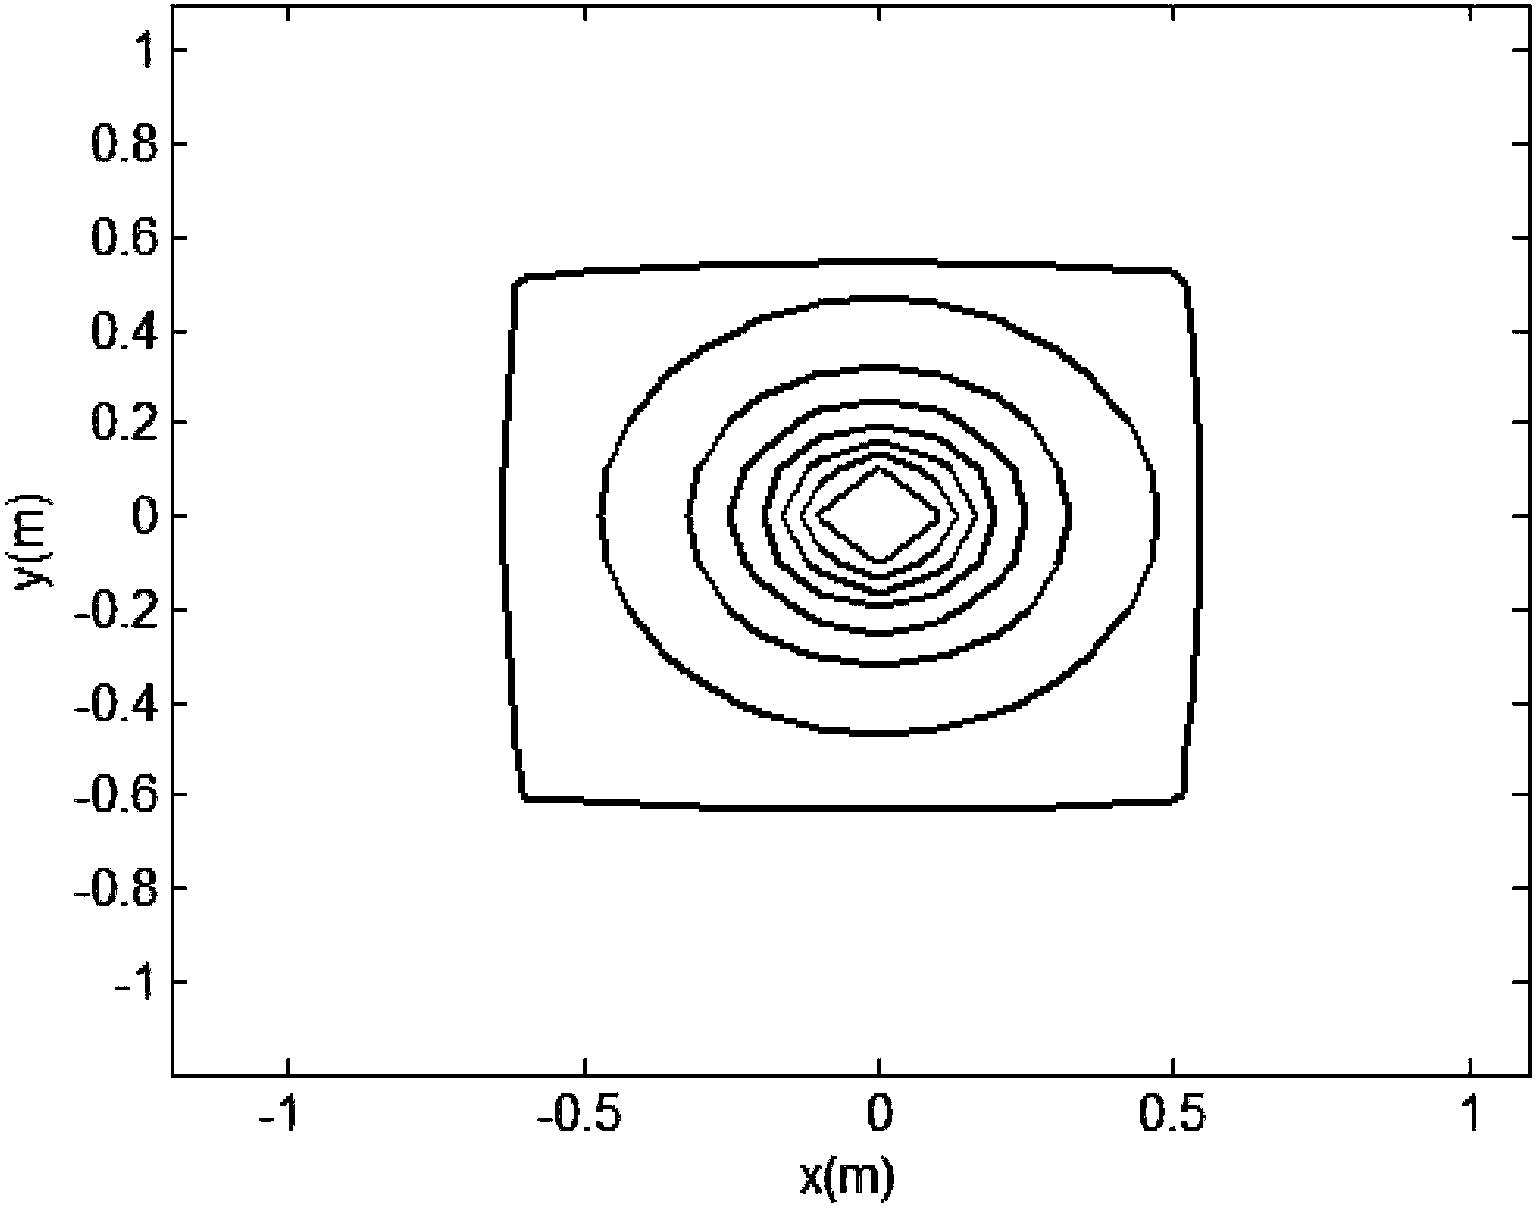 Noise source identification method adopting vibration speed measurement and partial near-field acoustical holography method